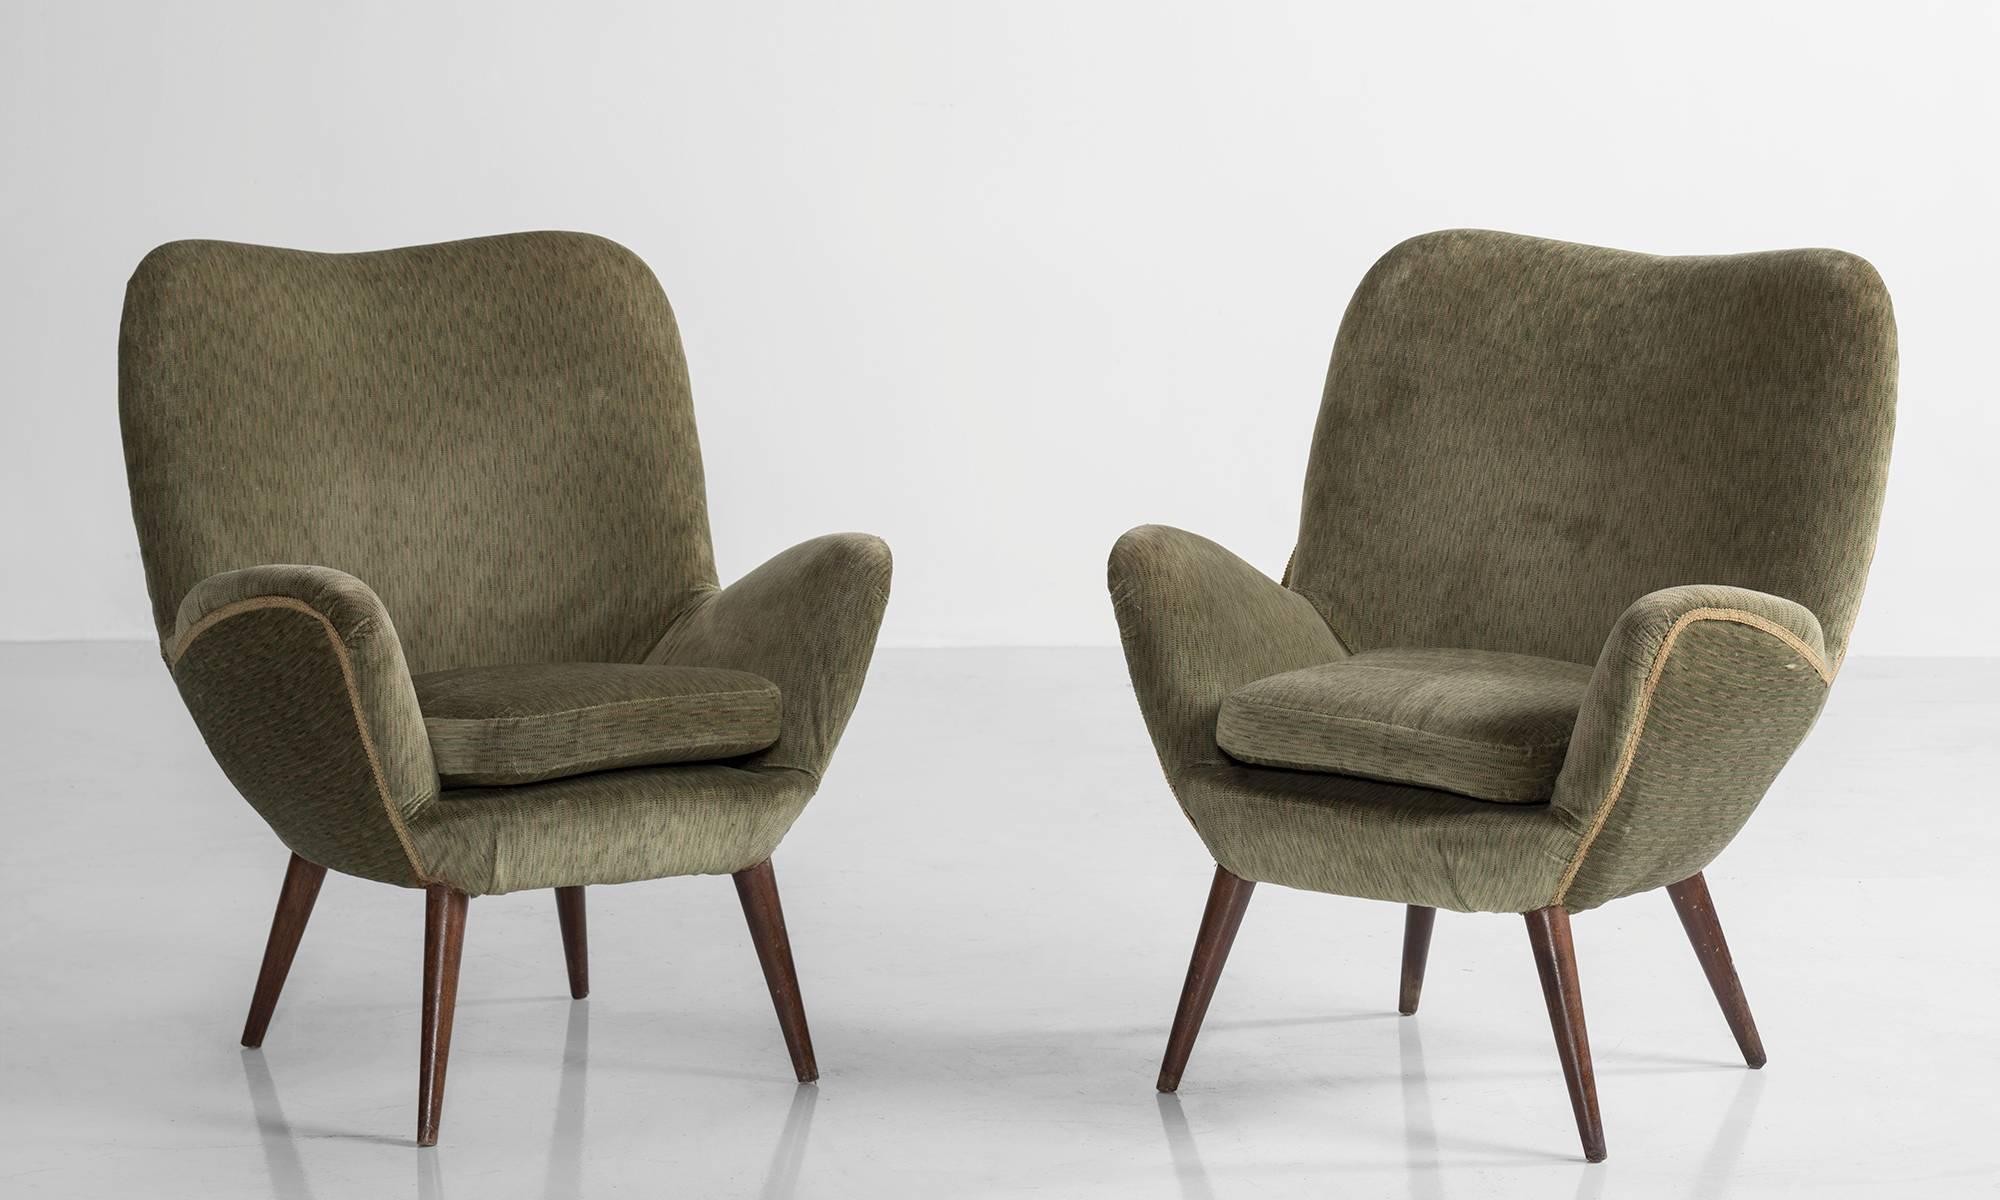 Pair of Giuseppe Carmignani armchairs with original Mohair upholstery on splayed wood peg legs.

Measures: 30" L x 29" D x 33" H x 17" seat

Made in Italy, circa 1958.